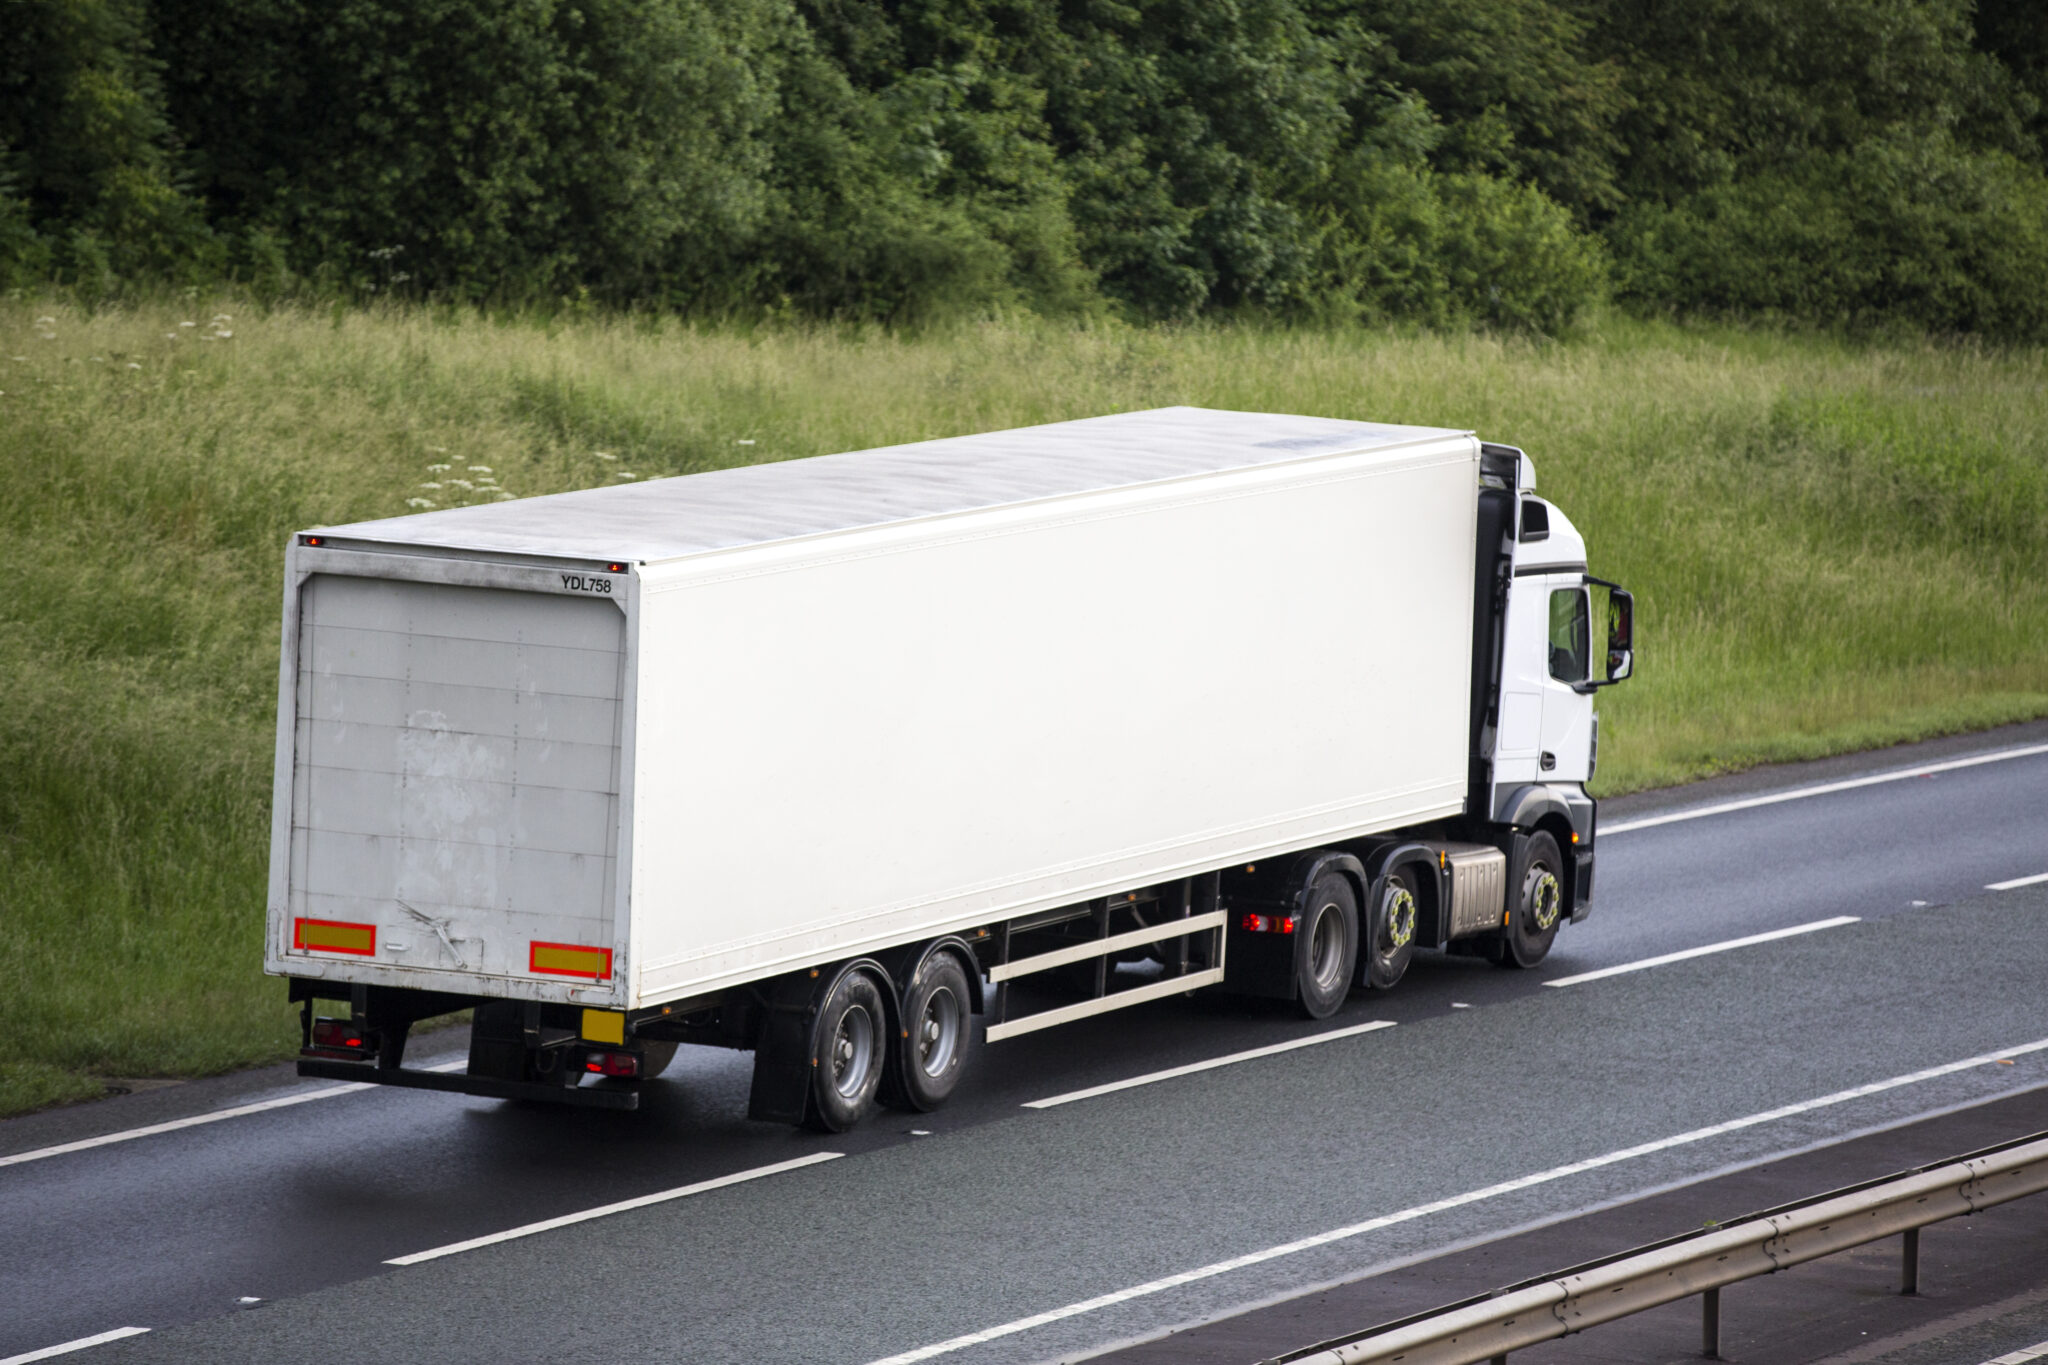 Commercial vehicles get 10 times more prohibitions three months after MOT